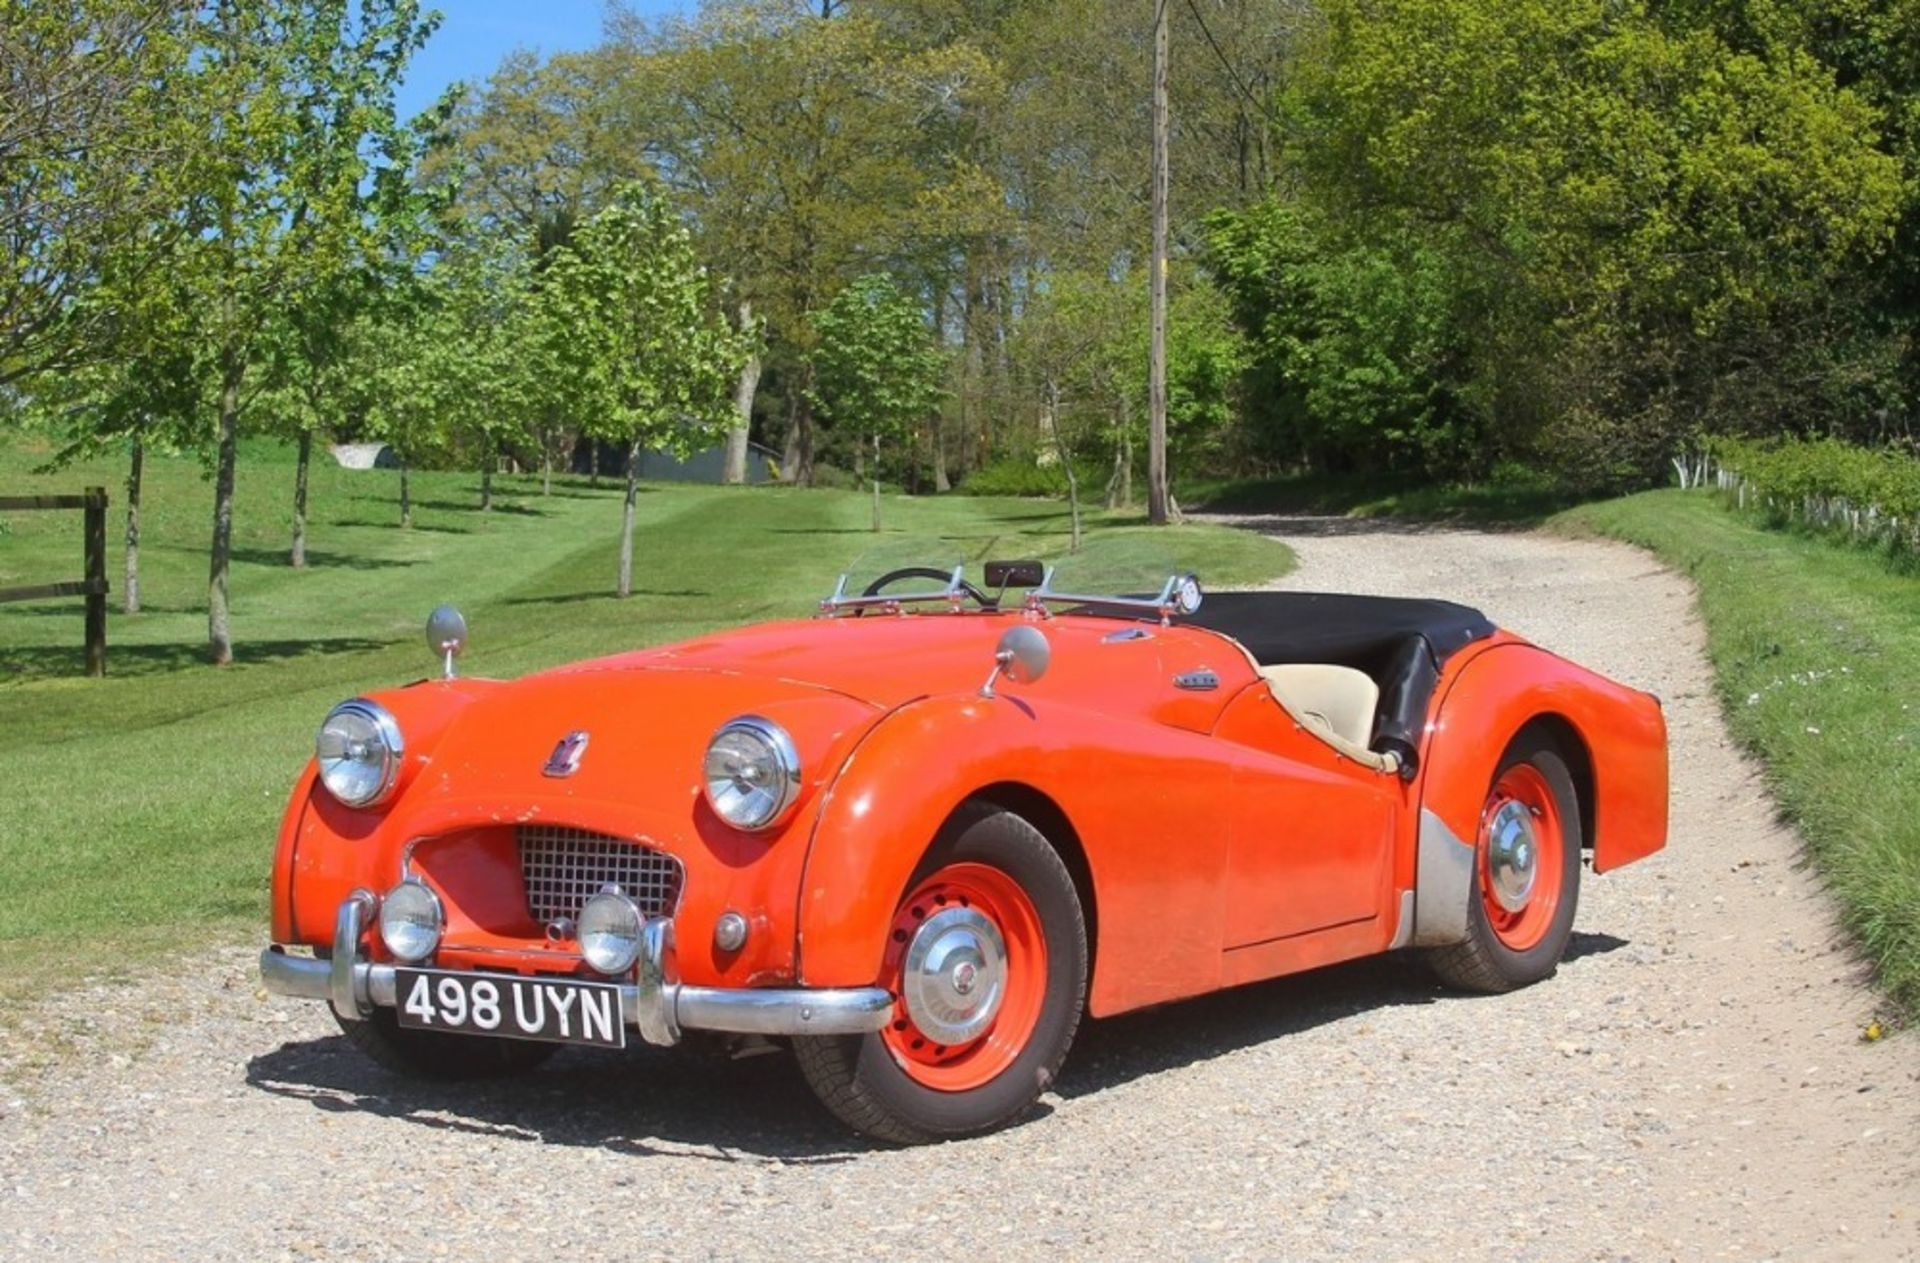 1955 TRIUMPH TR2 Registration Number: 498 UYN Chassis Number: TS/6692-O  Recorded Mileage: c.75,